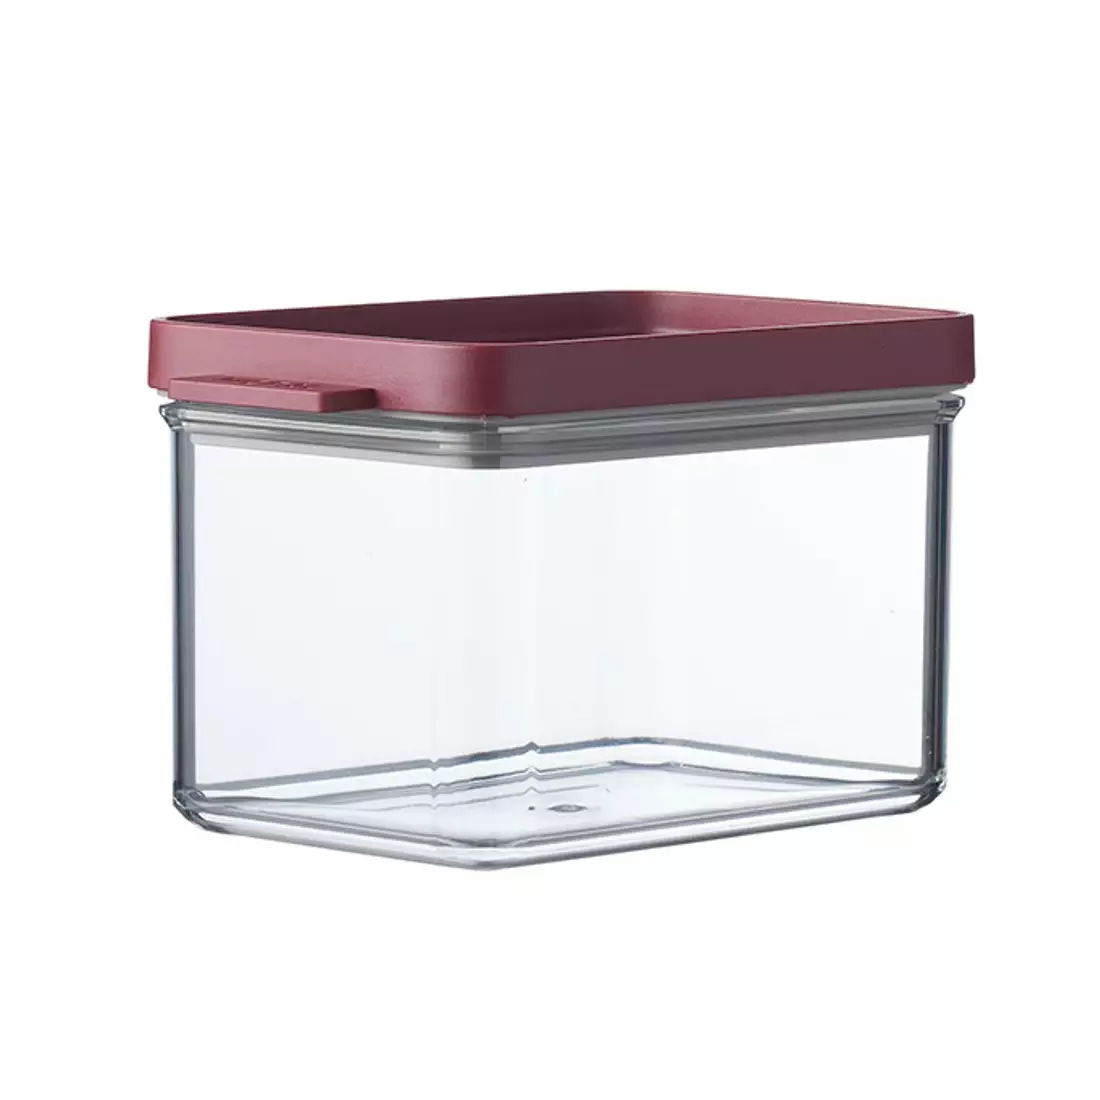 Mepal Omnia food container 700ml, Nordic Berry